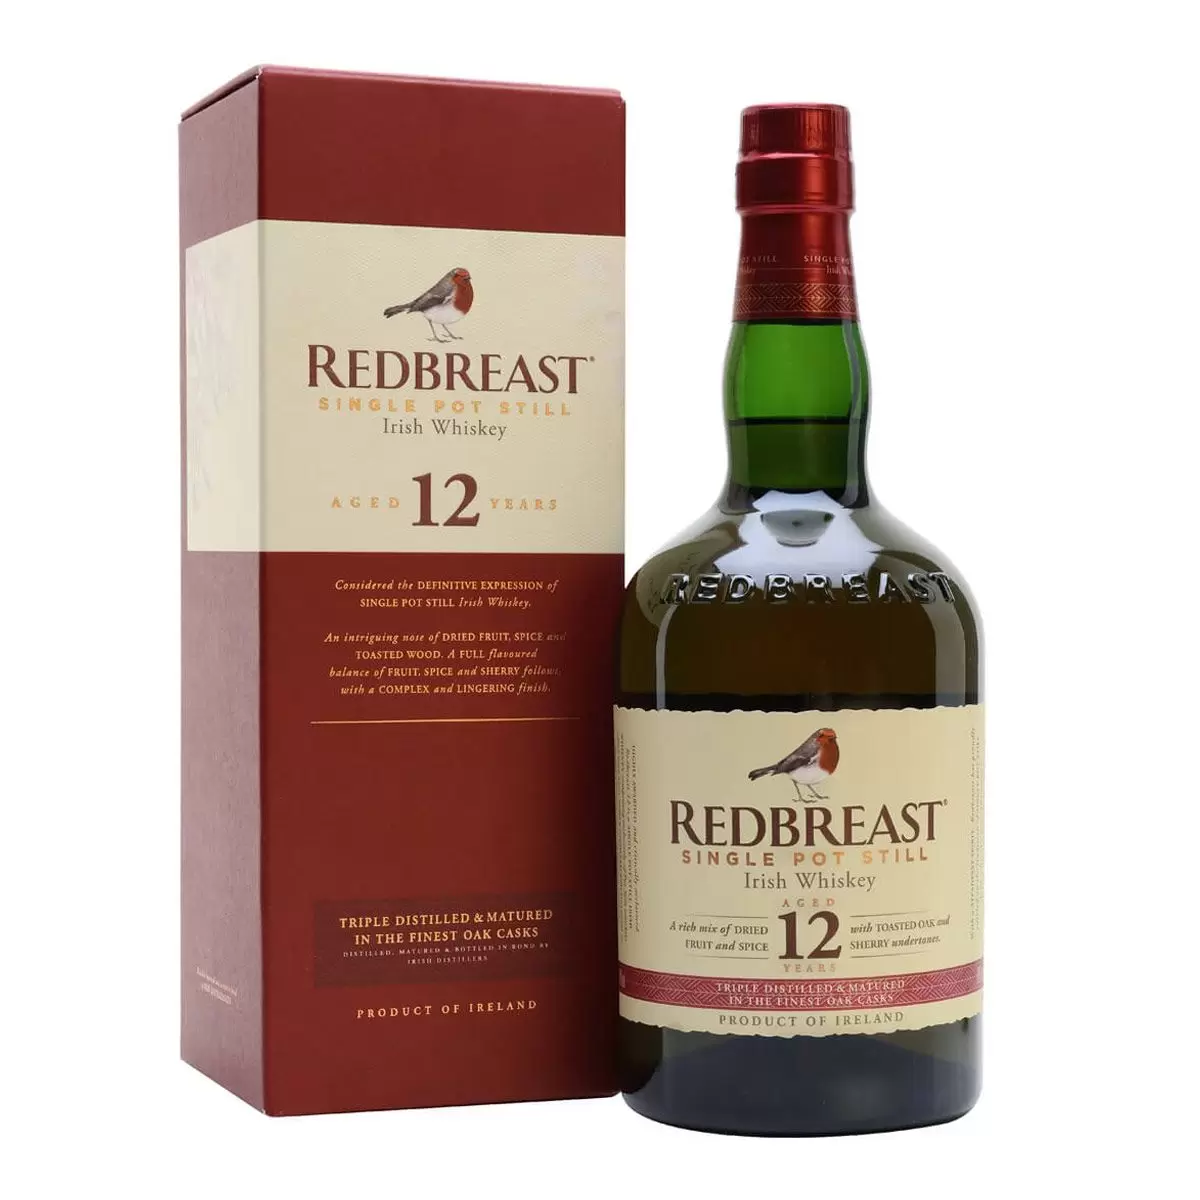 Redbreast 12-Year-Old Single Pot Still Irish Whiskey—70cl | The Liquid Collection